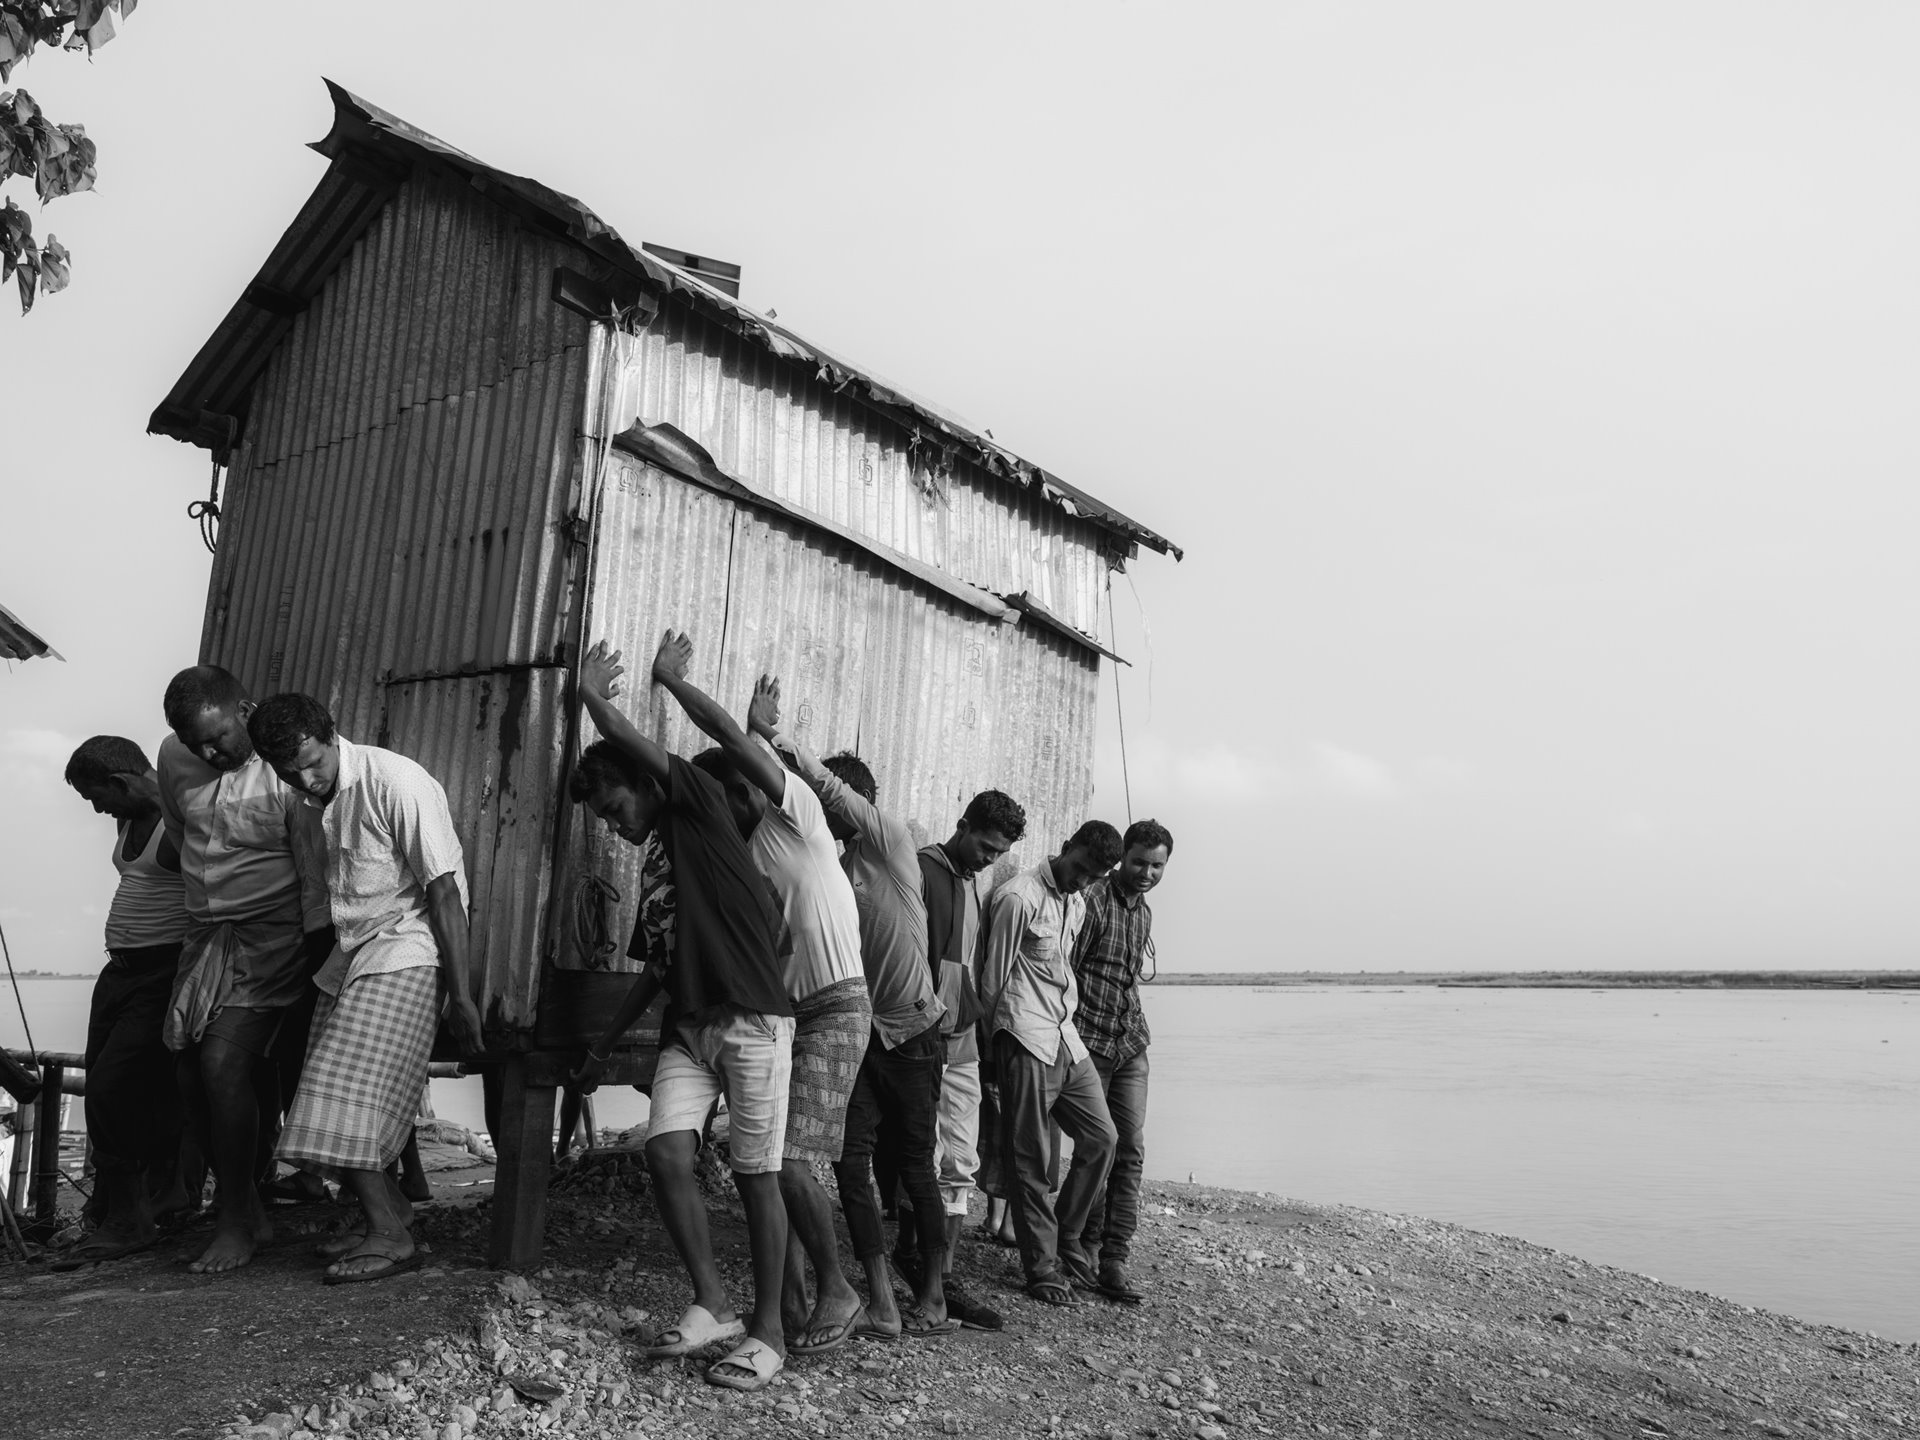 Bengali-speaking Hindus and Muslims help each other shift shops from the edge of the Brahmaputra river at the Tarabari ferry point. The shifting is done in anticipation of the erosion of land that occurs with each monsoon season, which is often devastating for residents as they are forced to constantly adapt to a changing landmass each year. Tarabari, Bahari constituency, Barpeta district, Lower Assam, India.